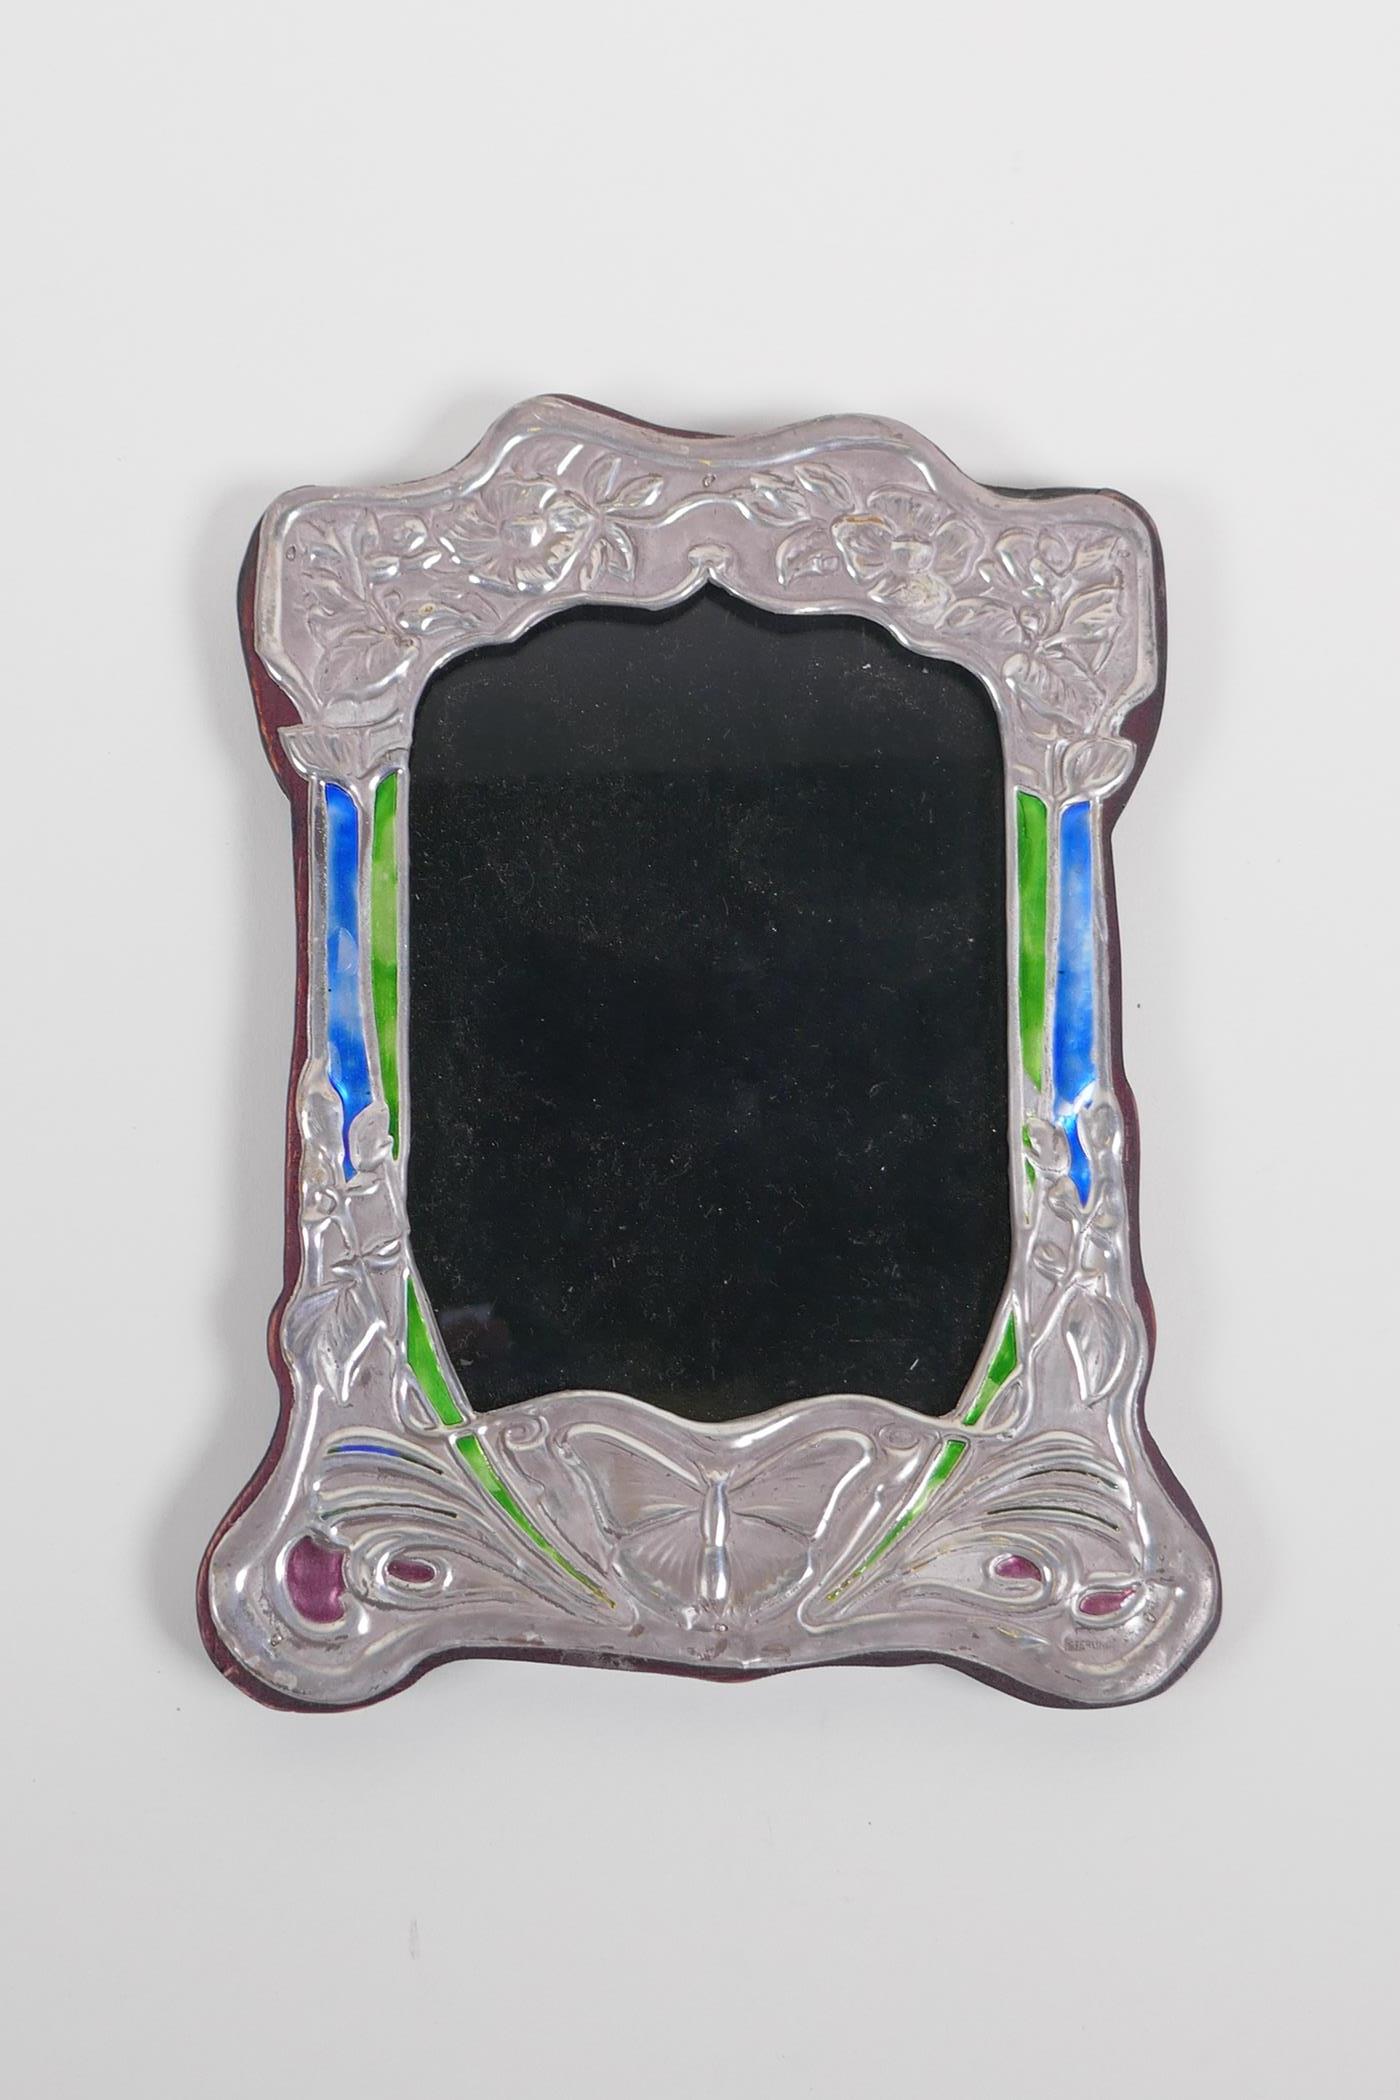 A sterling silver and enamelled Art Nouveau style photo frame, 15cm x 20cm